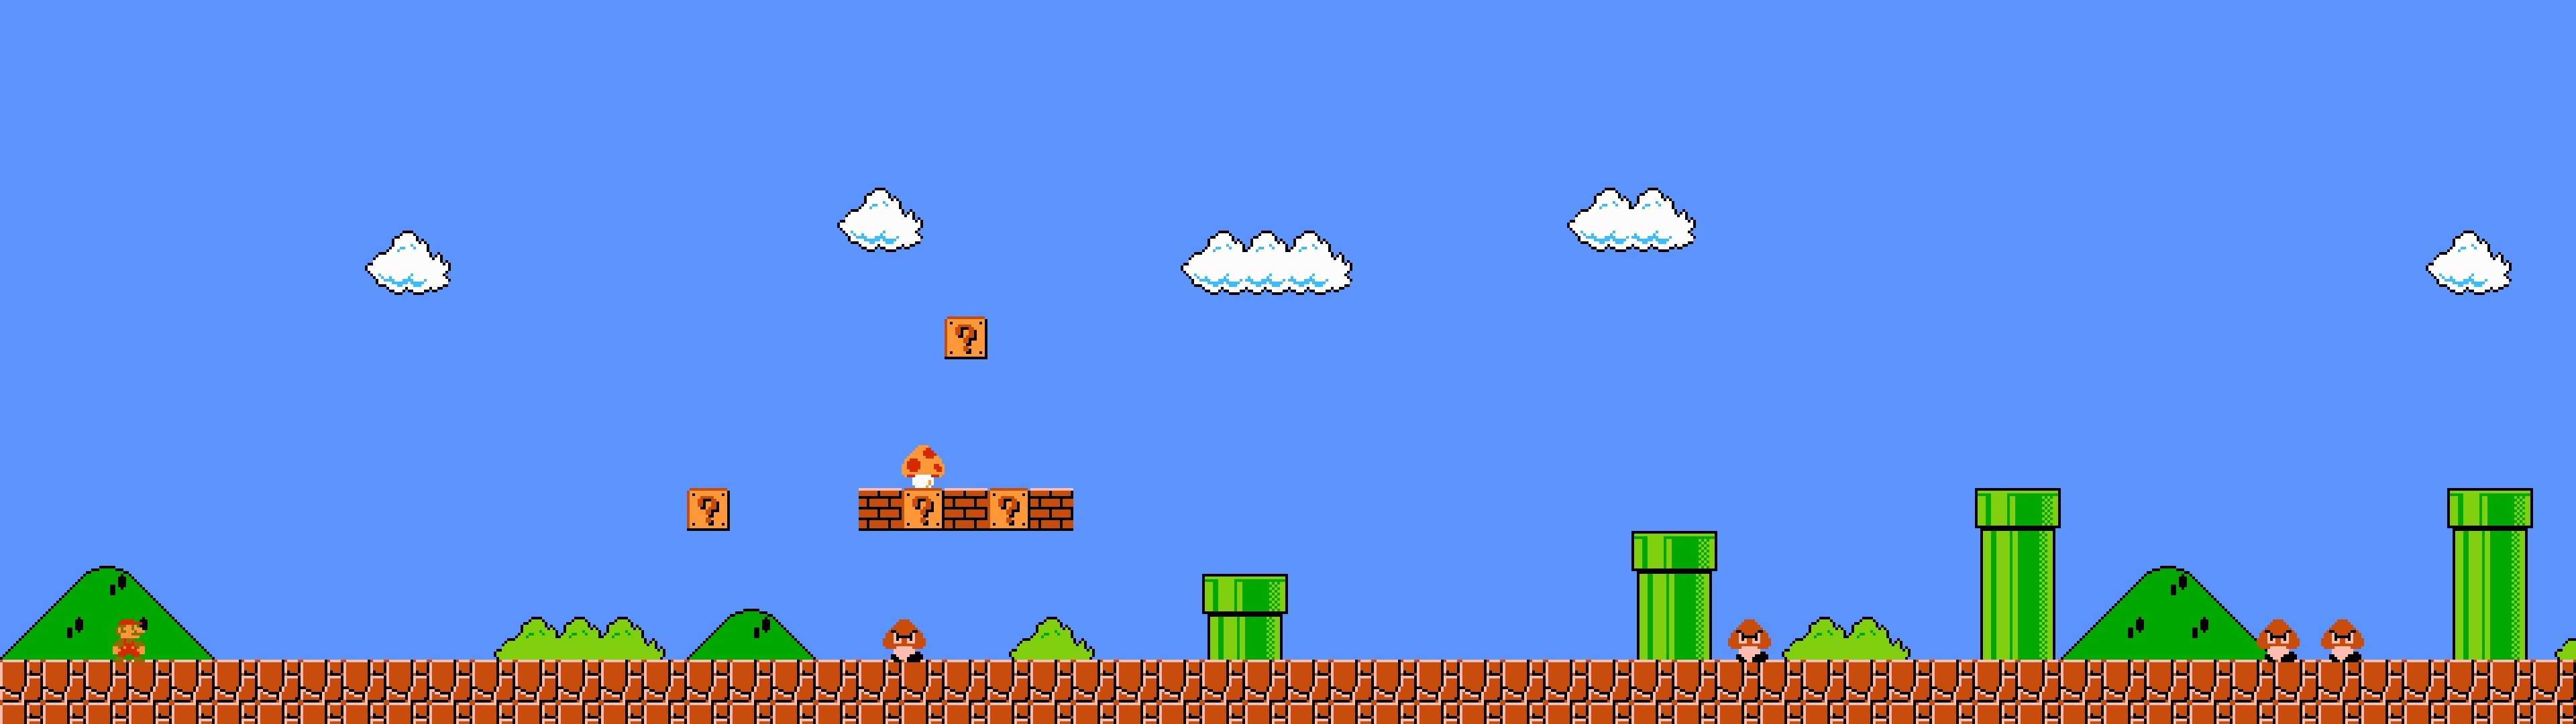 3840x1080 Dual-screen wallpapers, assorted retro games